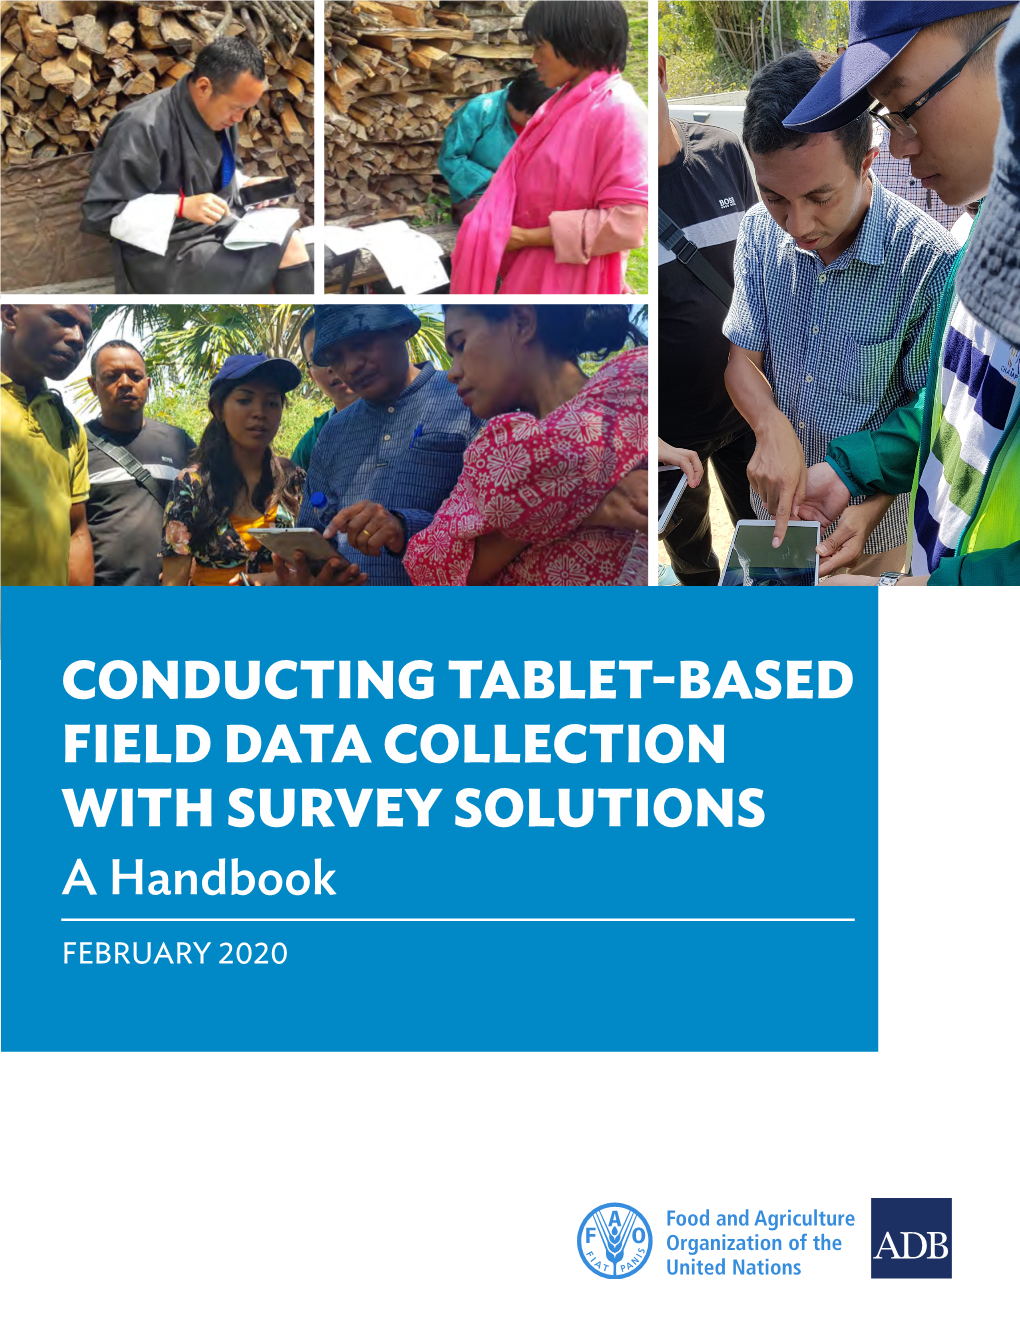 Conducting Tablet-Based Field Data Collection with Survey Solutions a Handbook